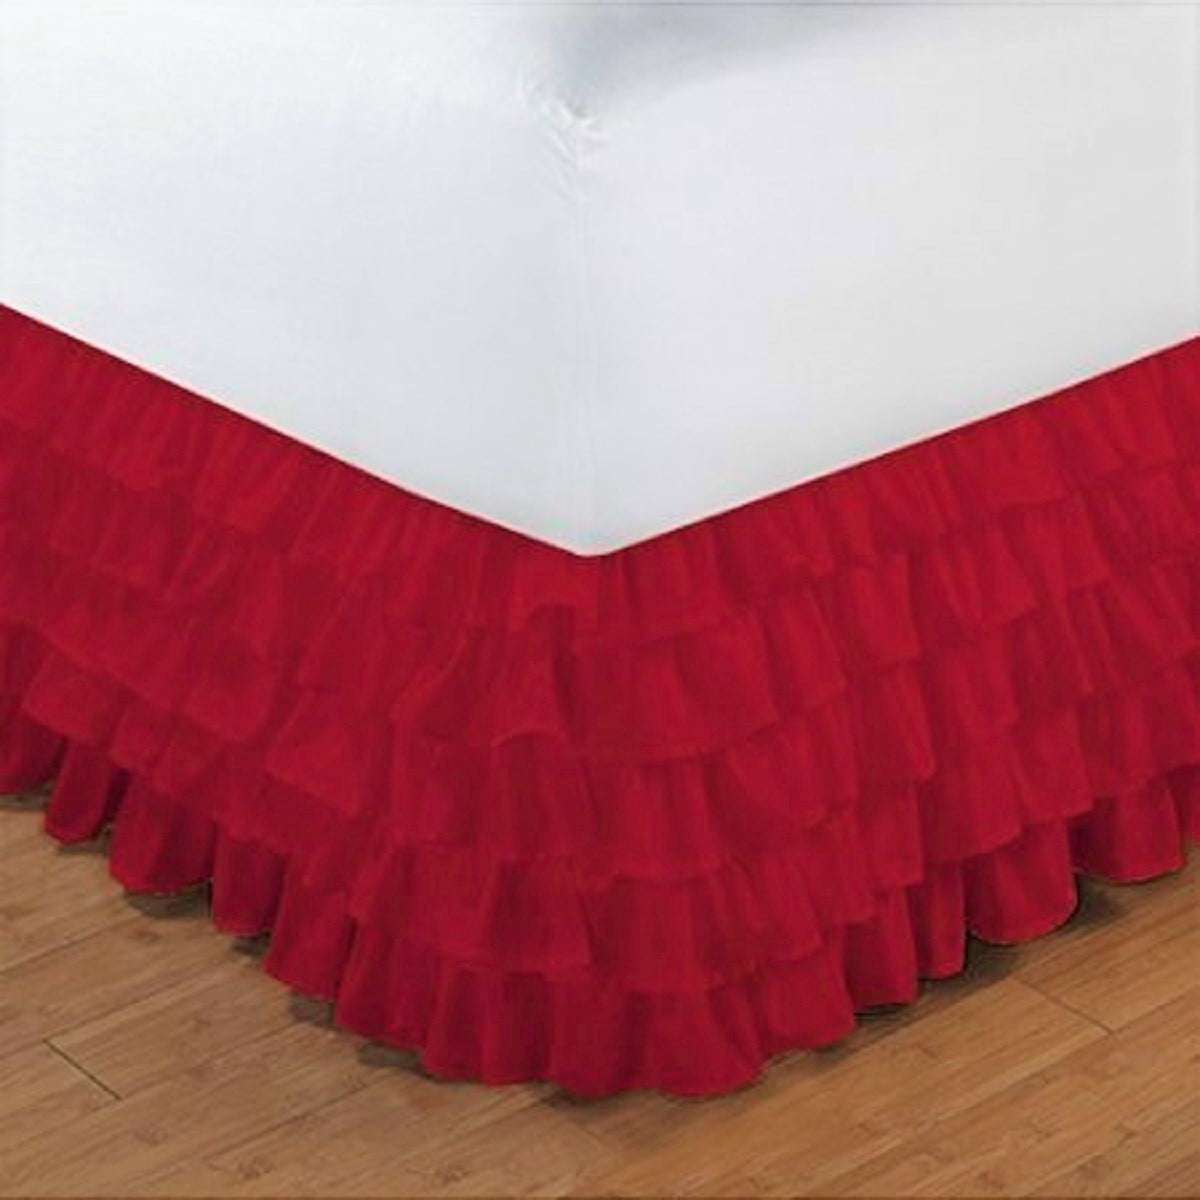 14" DROP SOLID EASY FIT SET UP PLEATED ALL CORNERS 1 PC BED SKIRT RED FULL 